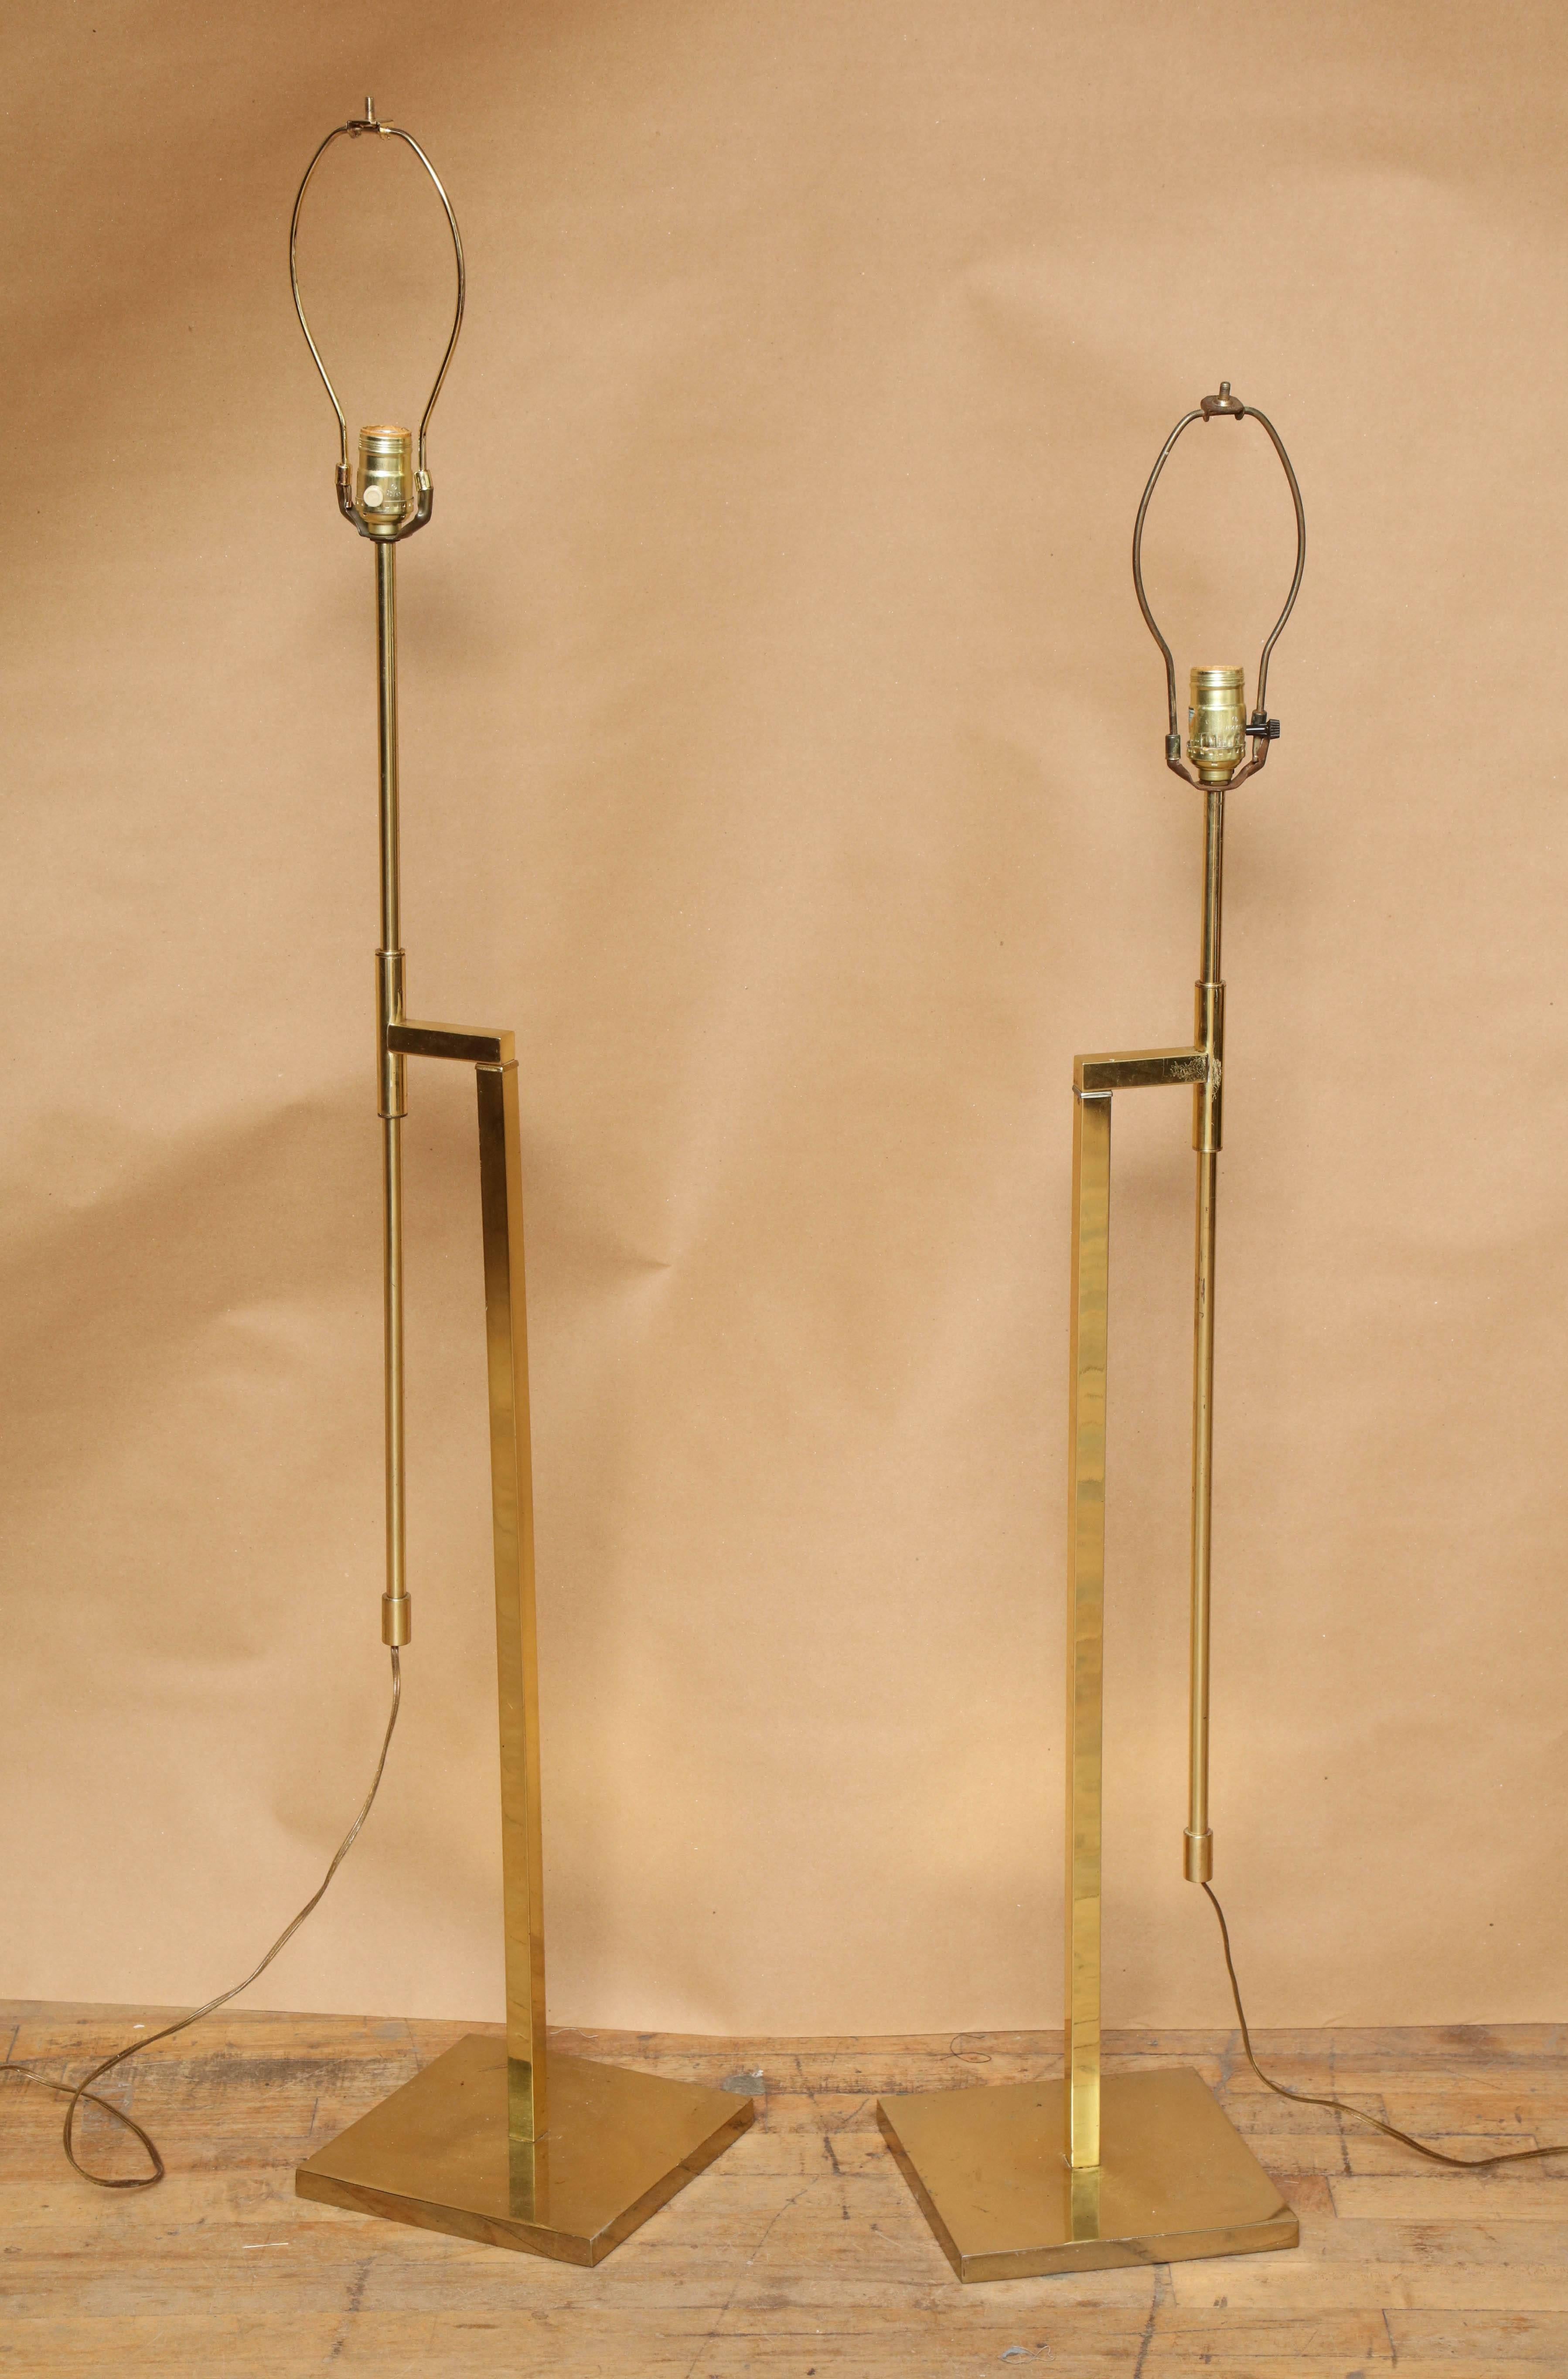 A pair of brass floor lamps by Laurel Lamp Company. Lowest height is 42